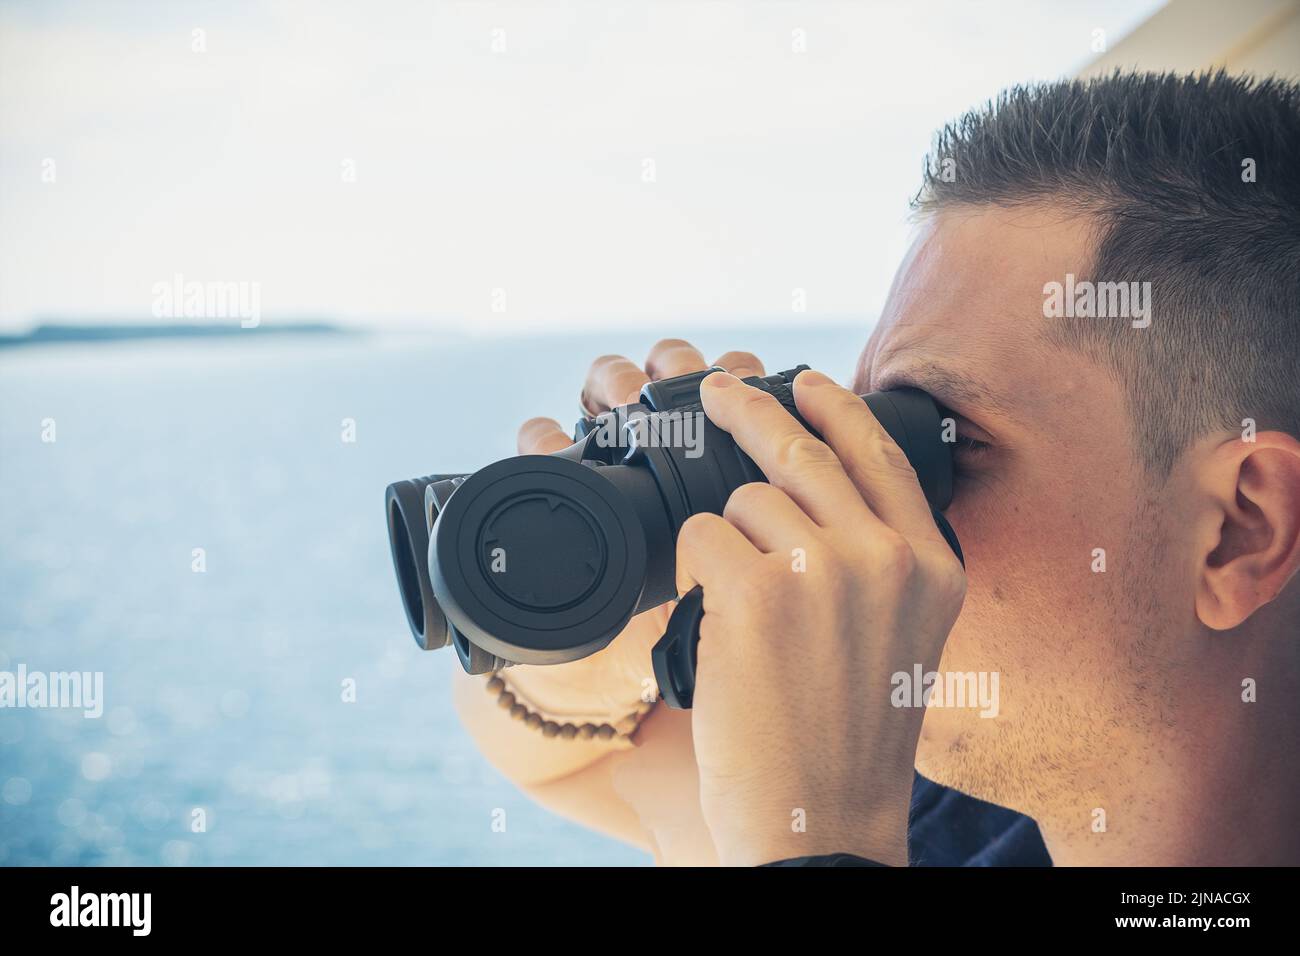 15 June 2021: Young Man Looking Through Binoculars On A Trip By Boat. Boat Trip With Binoculars Stock Photo